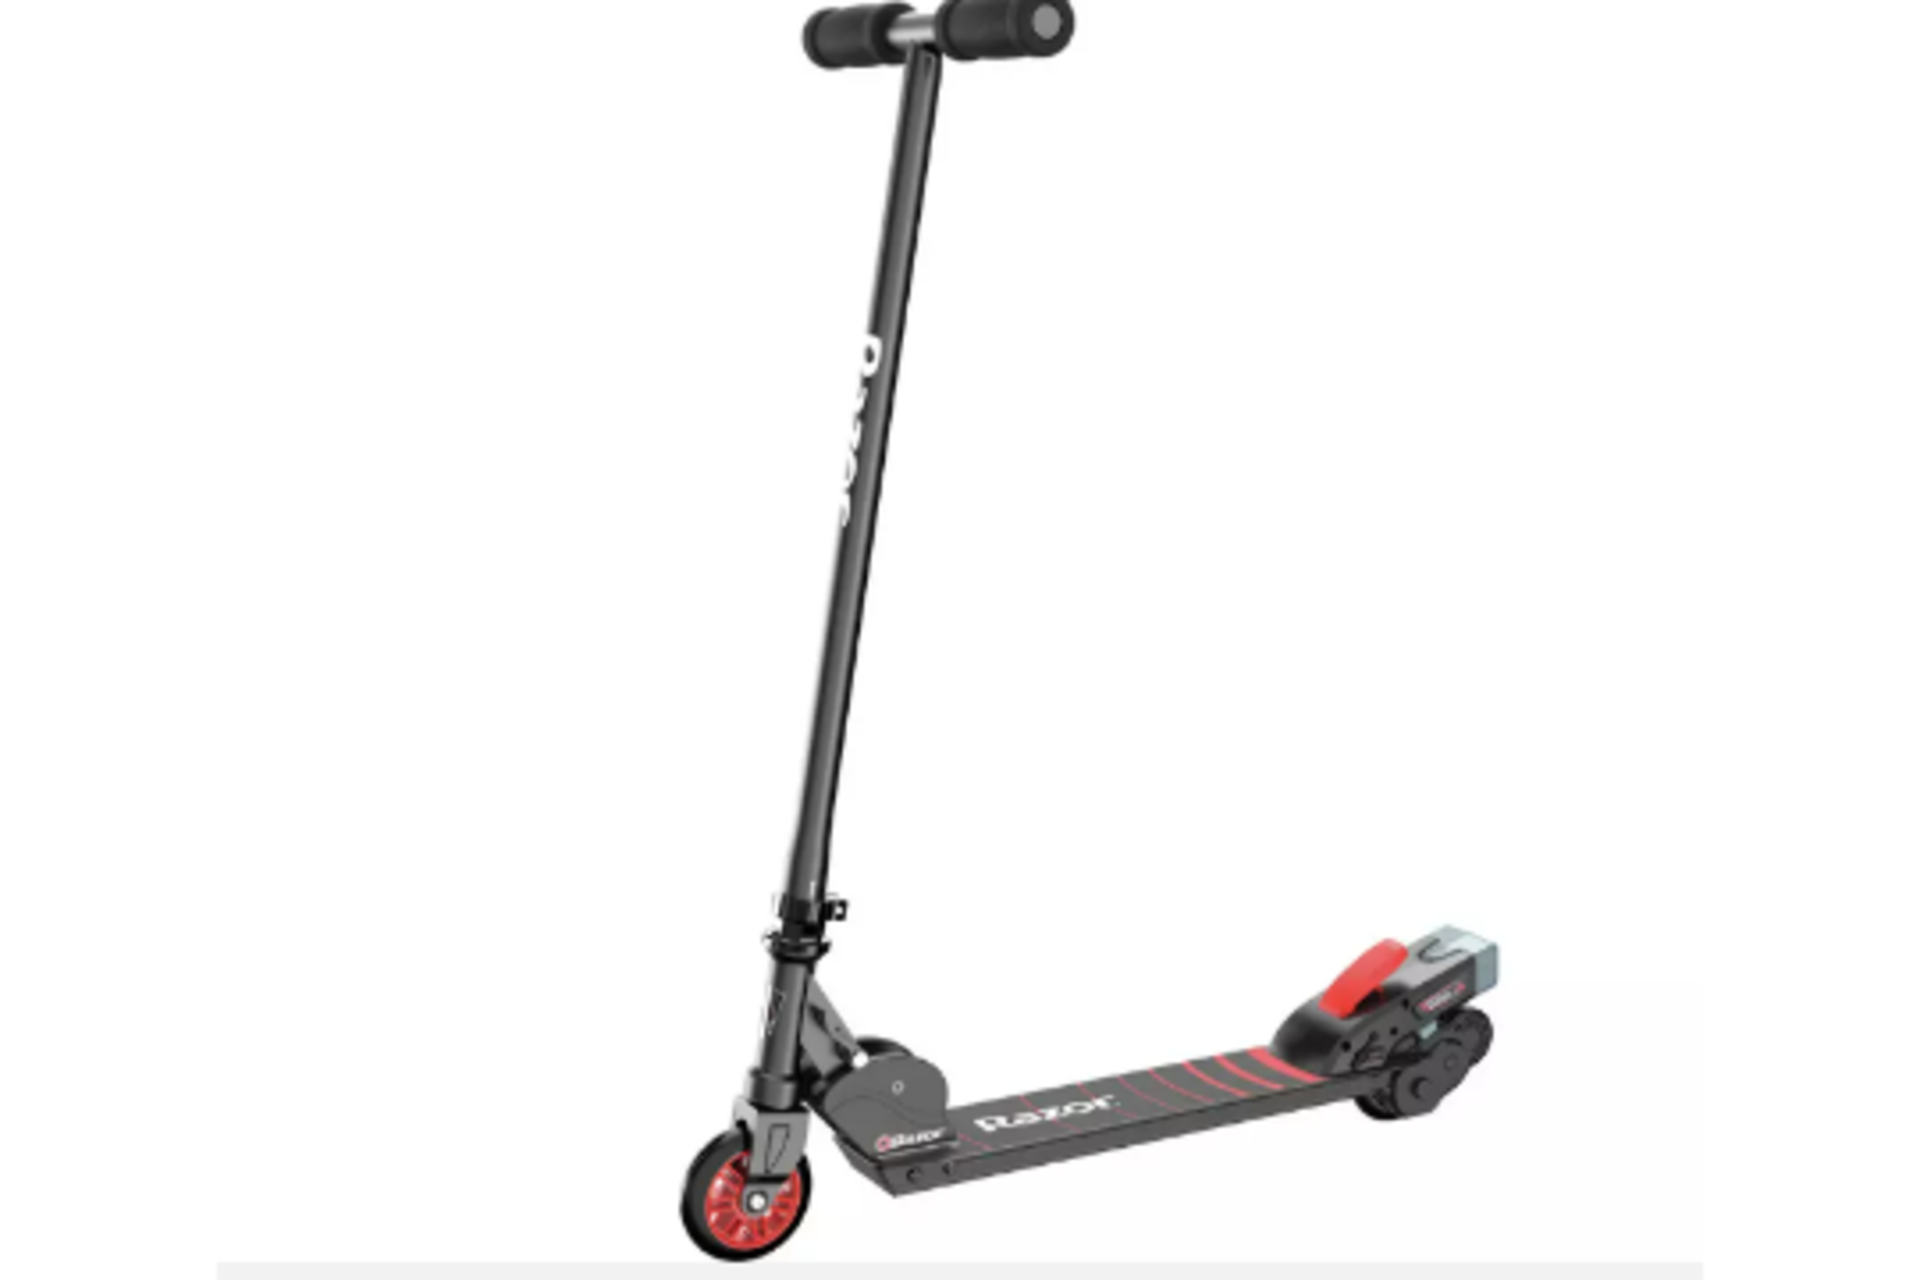 (ex17) Razor Turbo A Black Label Electric Scooter RRP £175.00. Simply step on and kick off to